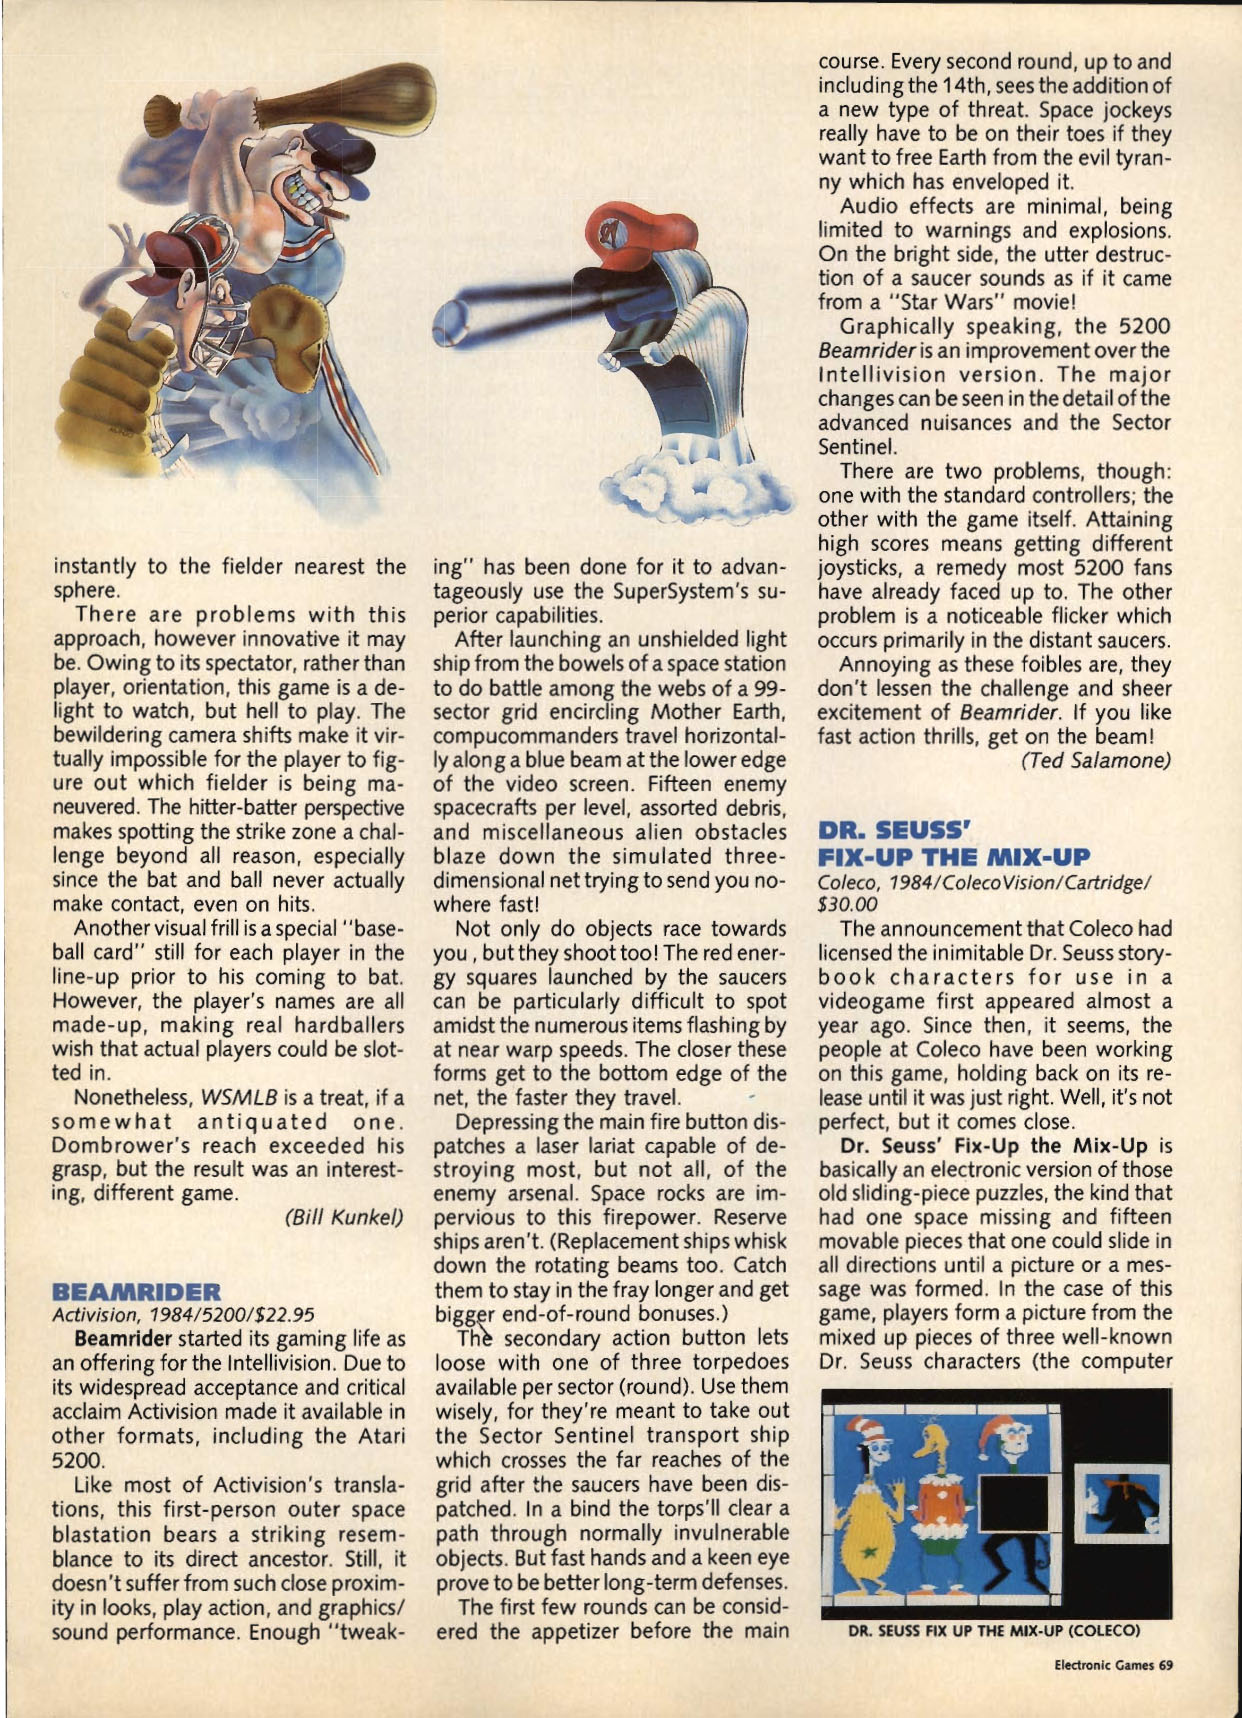 World Series Major League Baseball Review, Electronic Games March 1985 page 69